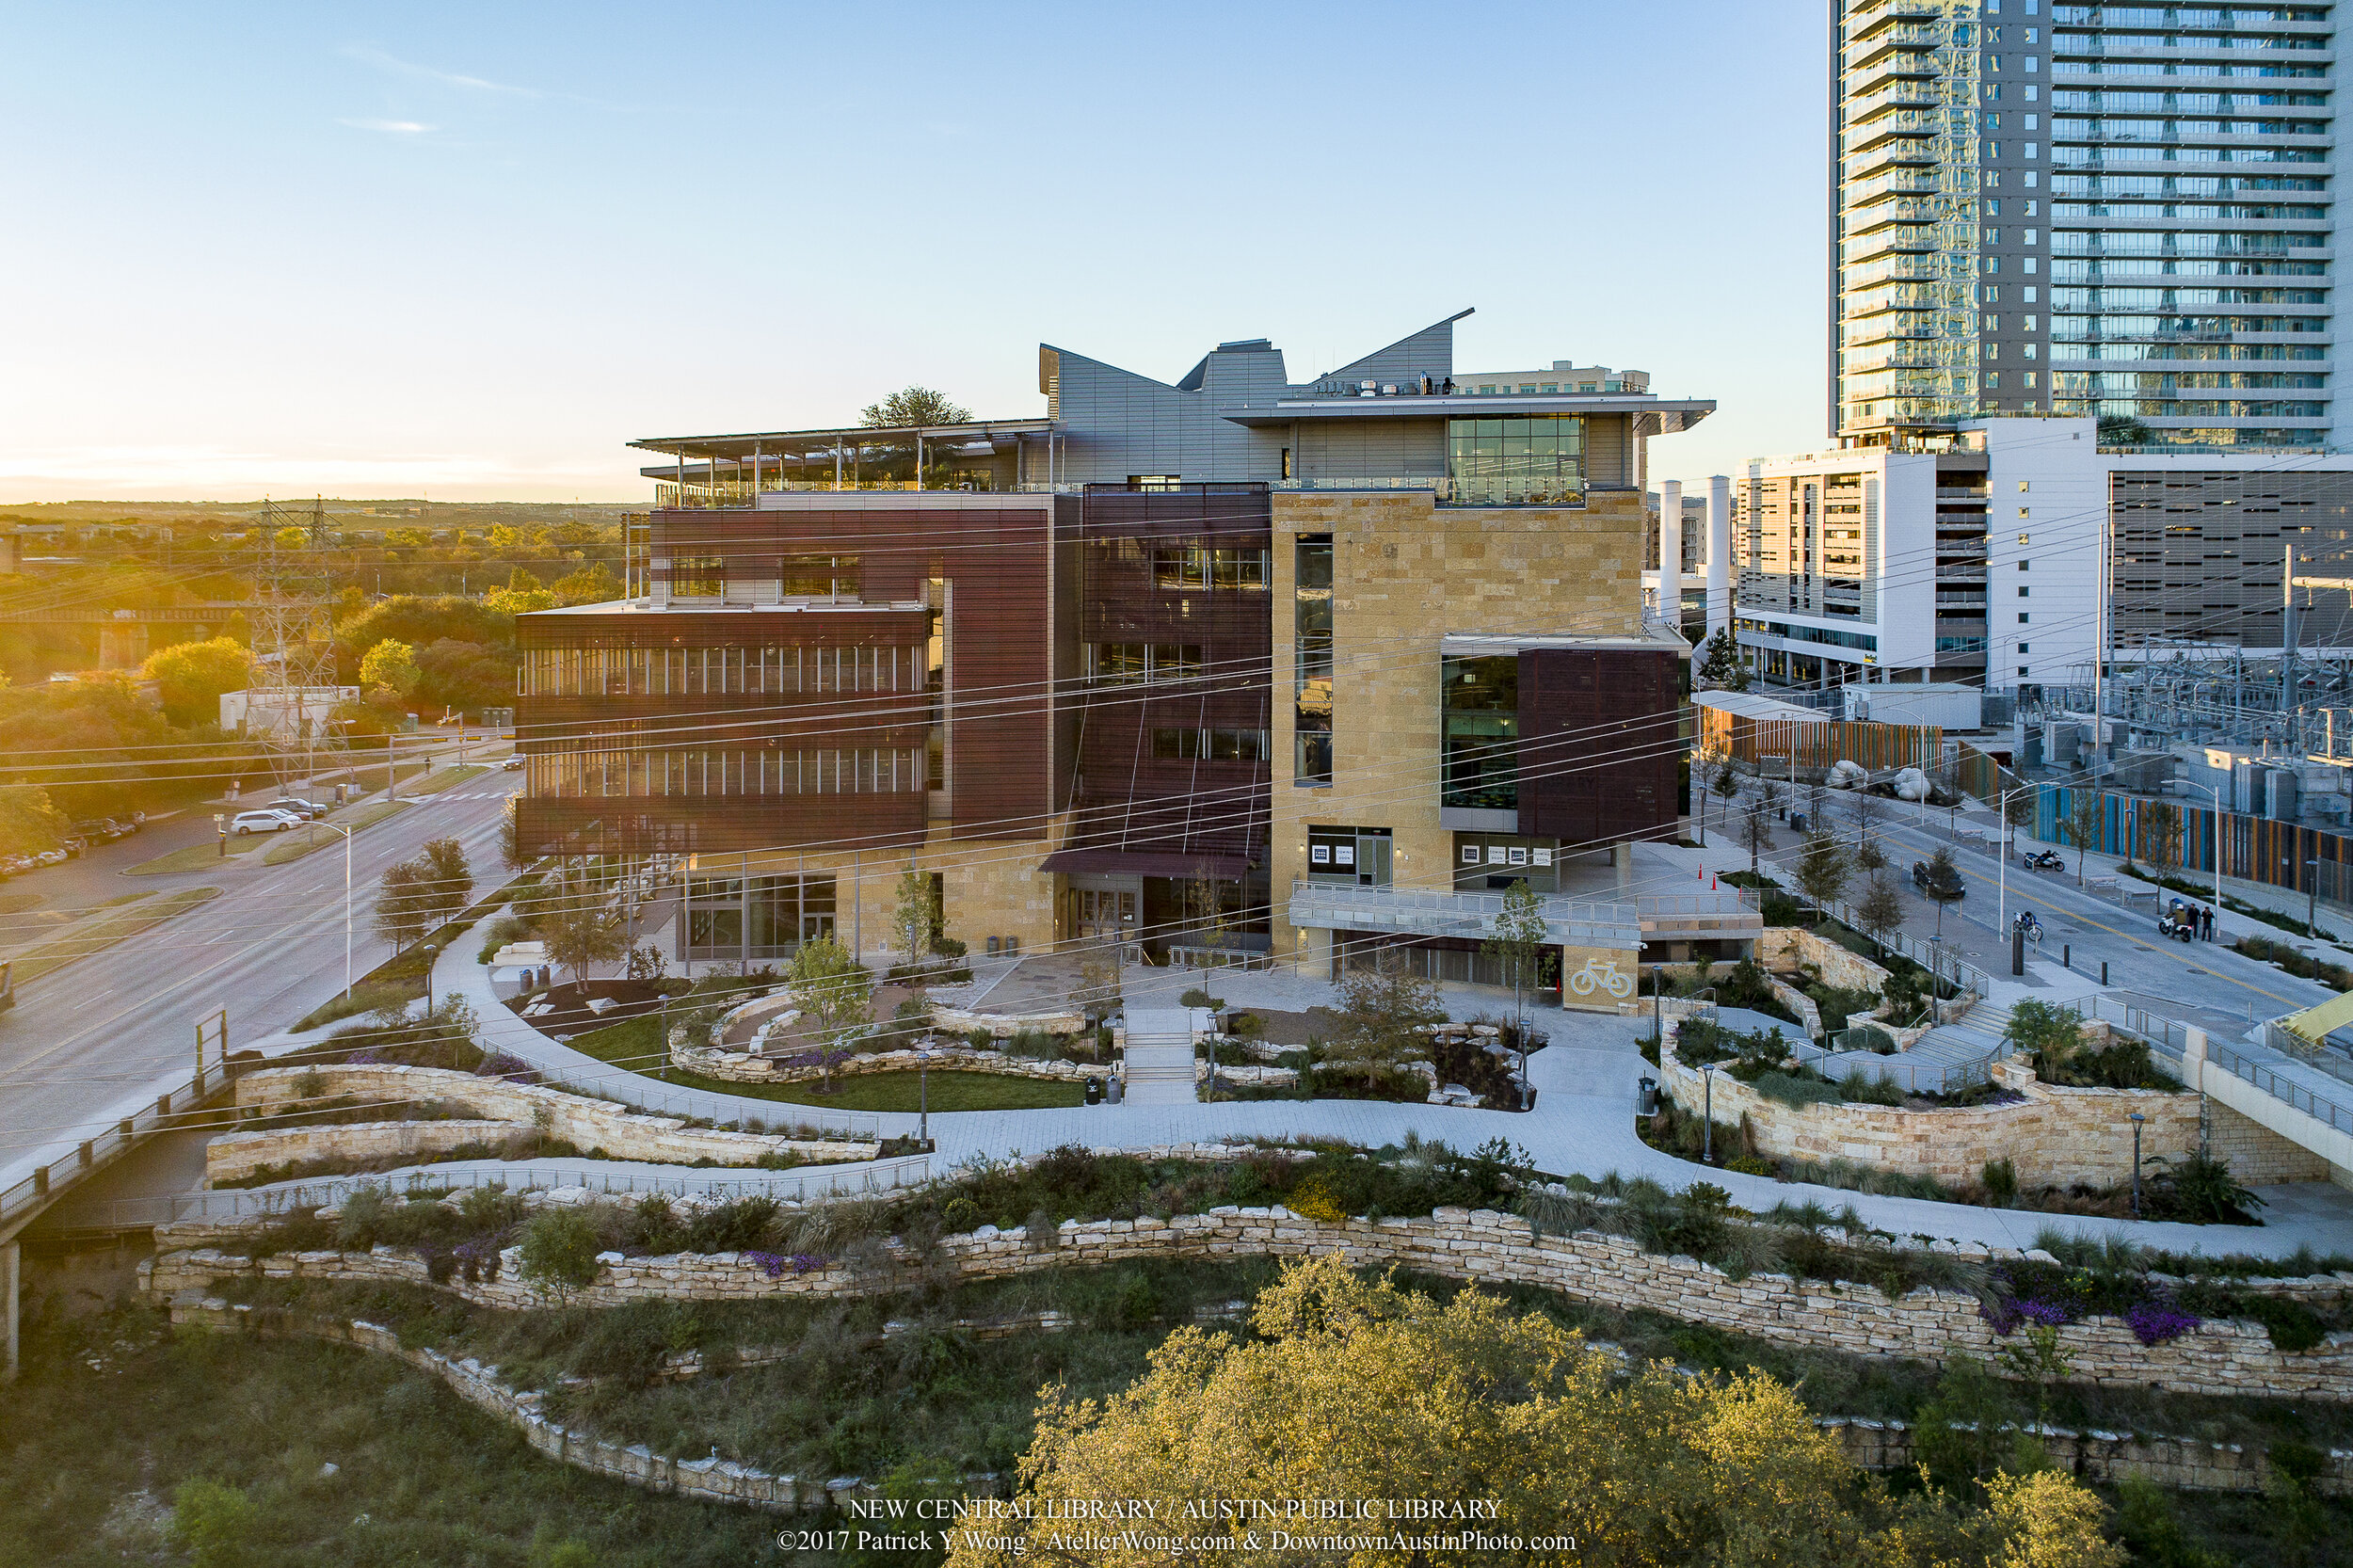 Austin Public Library - Central Library in downtown Austin, Texas